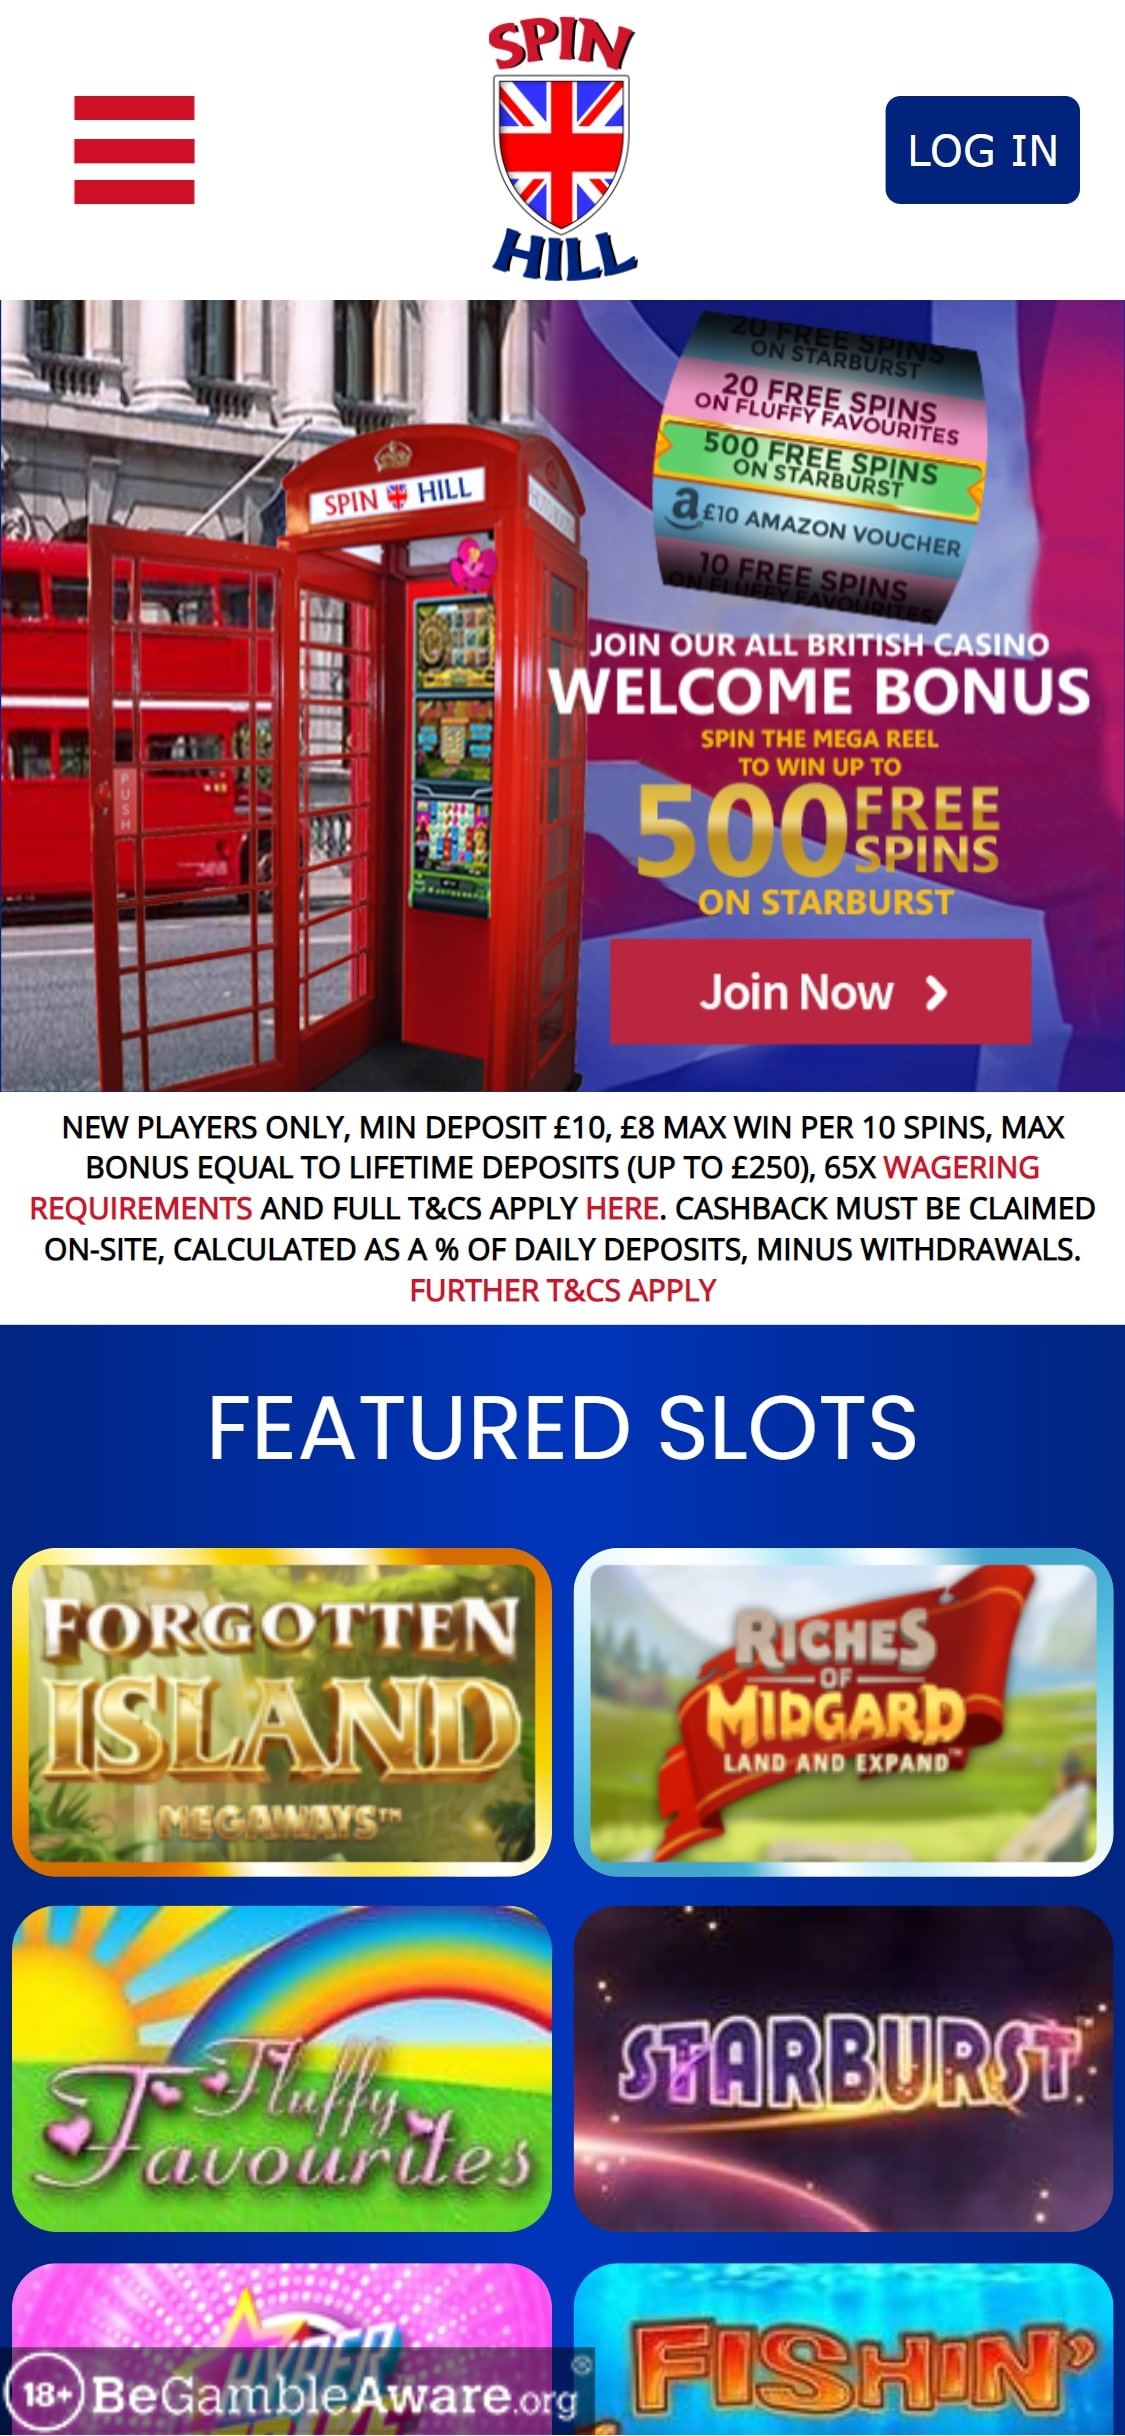 Spin Hill Casino Mobile Review